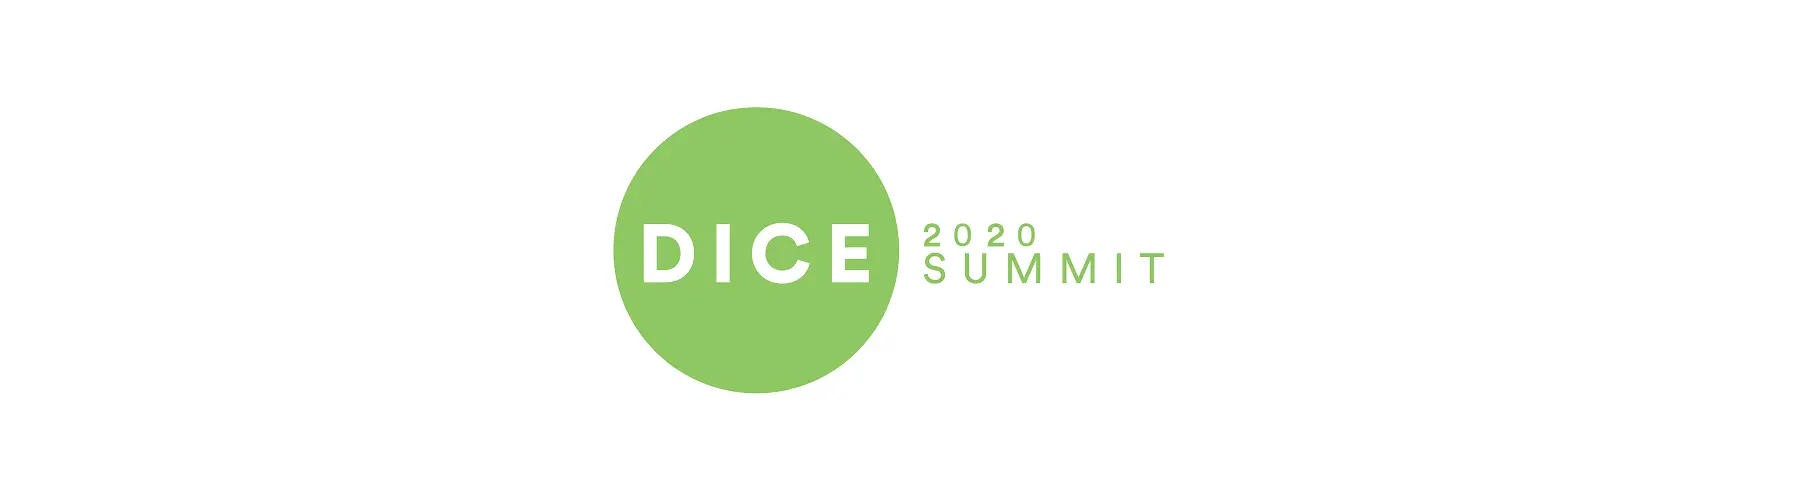 DENNIS COOPER LEADS ROUNDTABLE SESSION ON GAMES AND CLIMATE CHANGE AT D.I.C.E. SUMMIT 2020